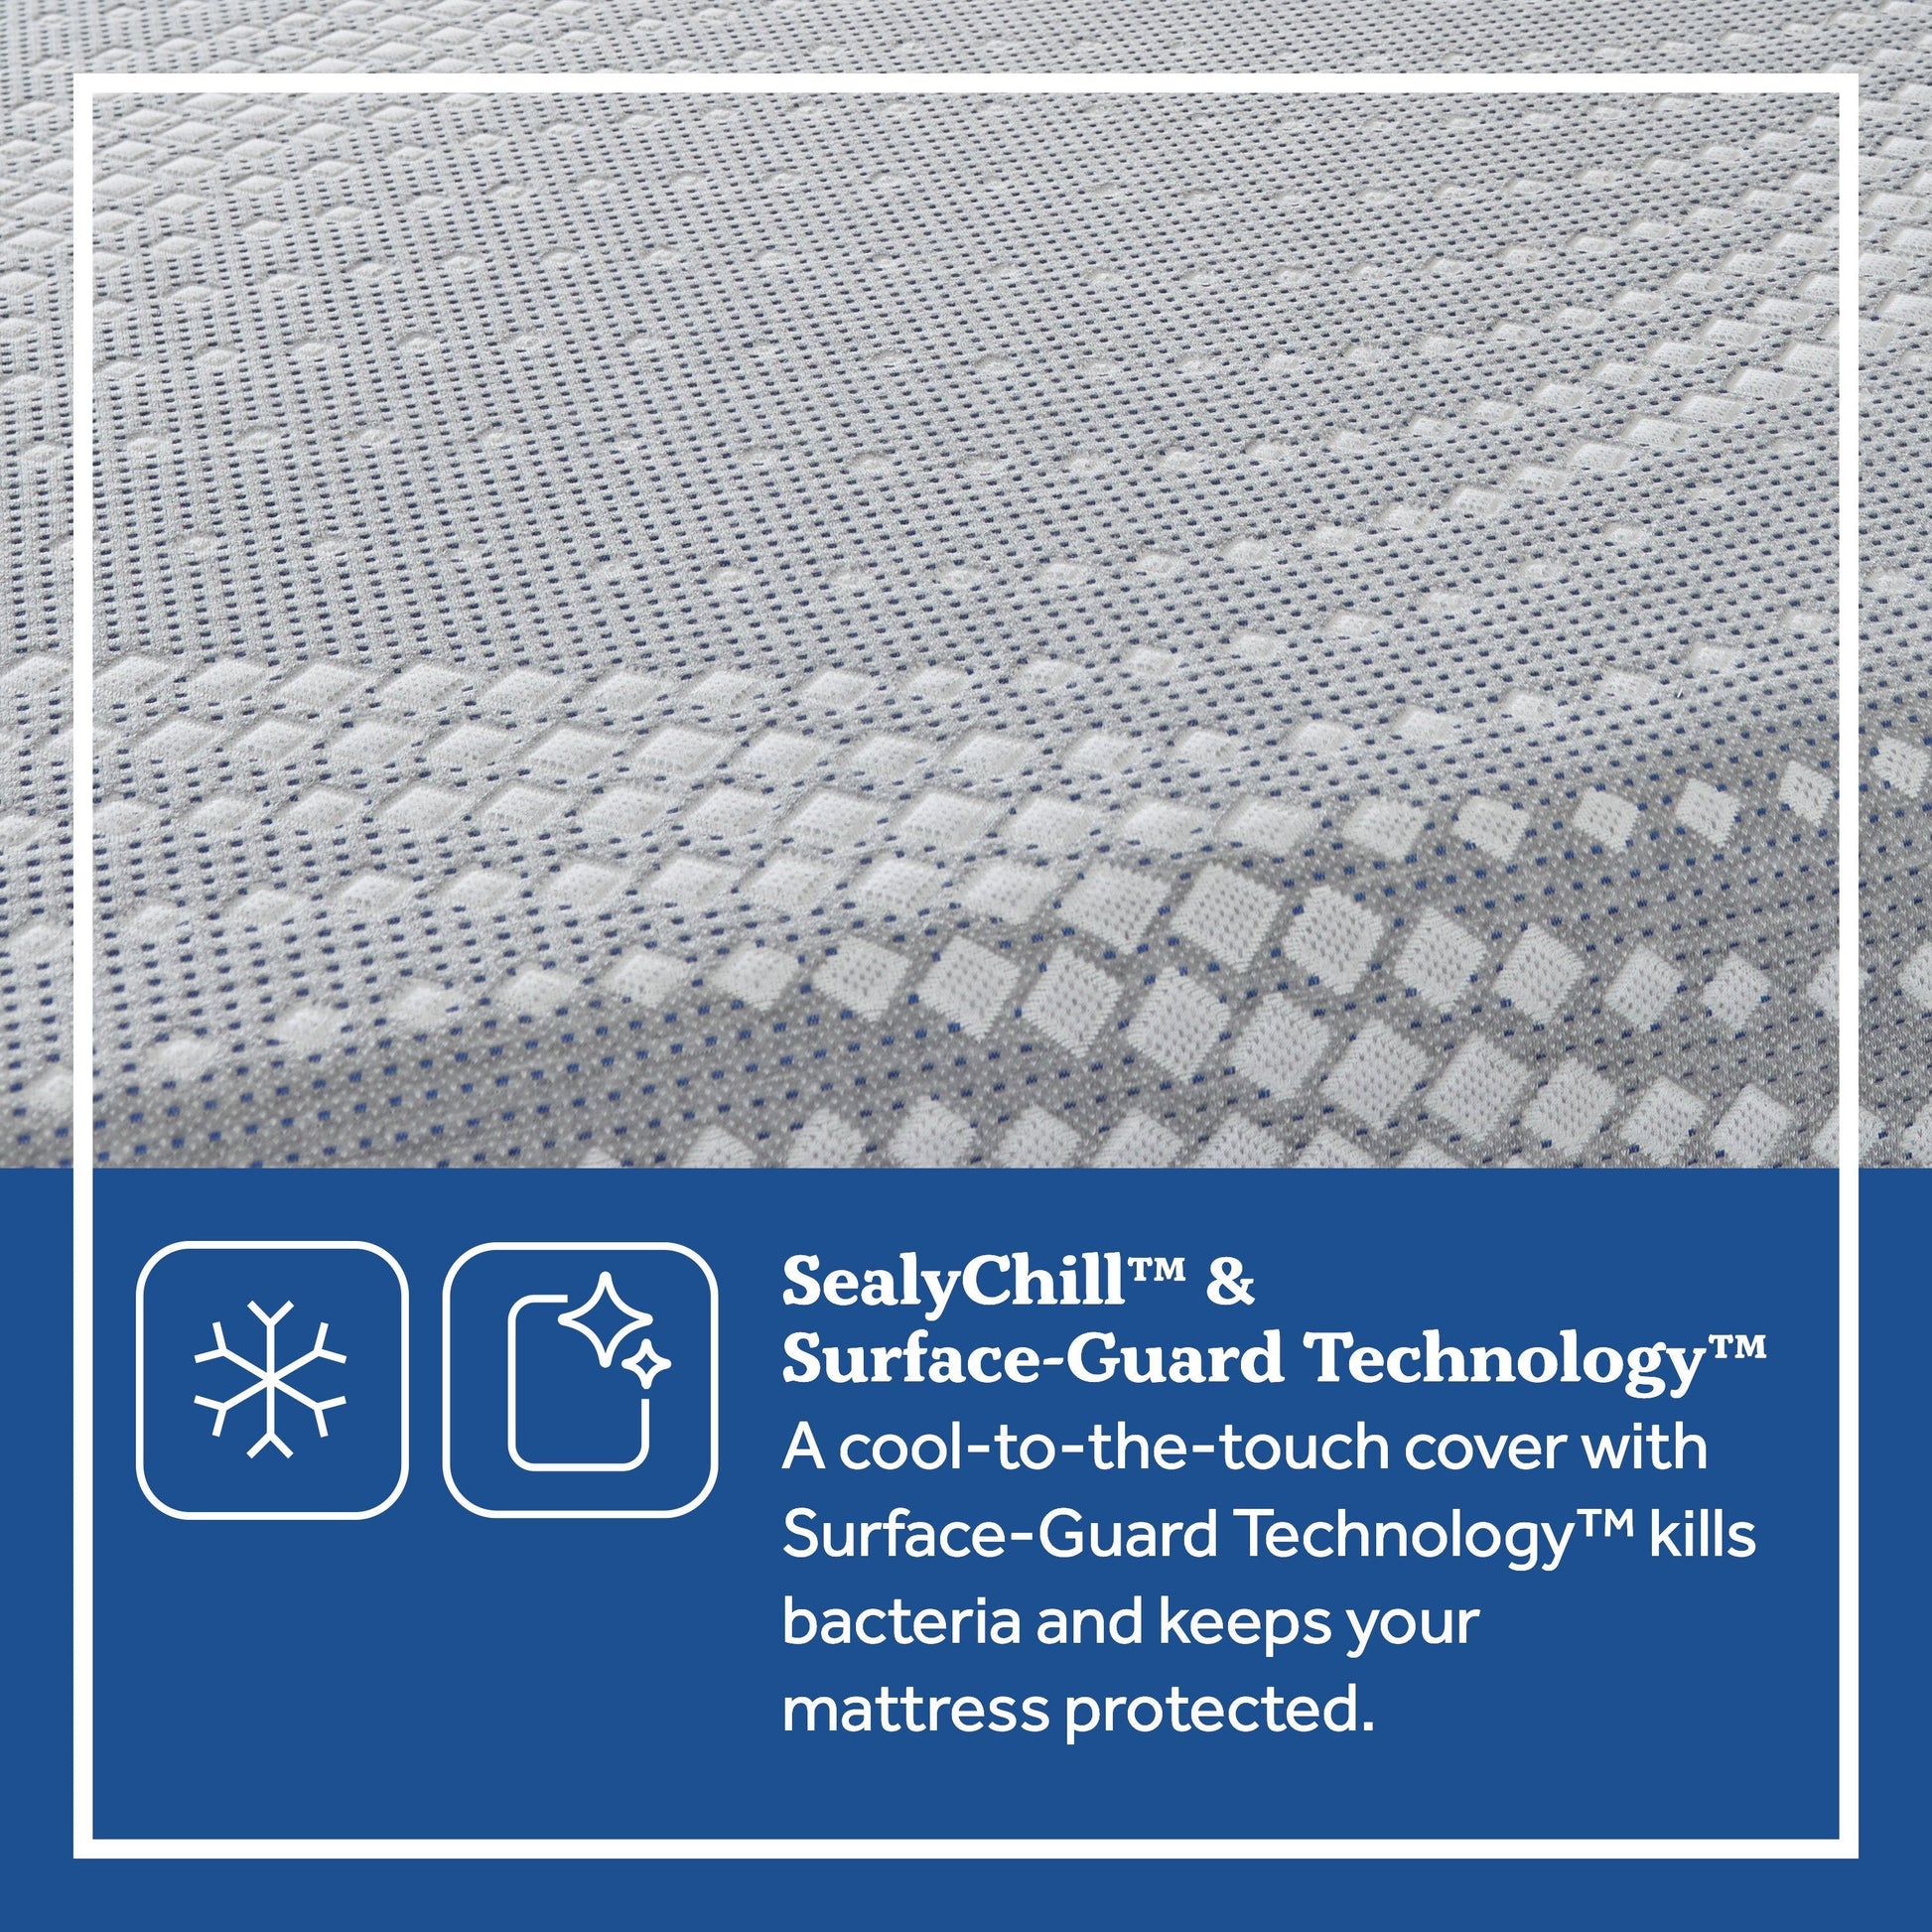 Sealy Hybrid Haralson Soft Mattress Features Guide